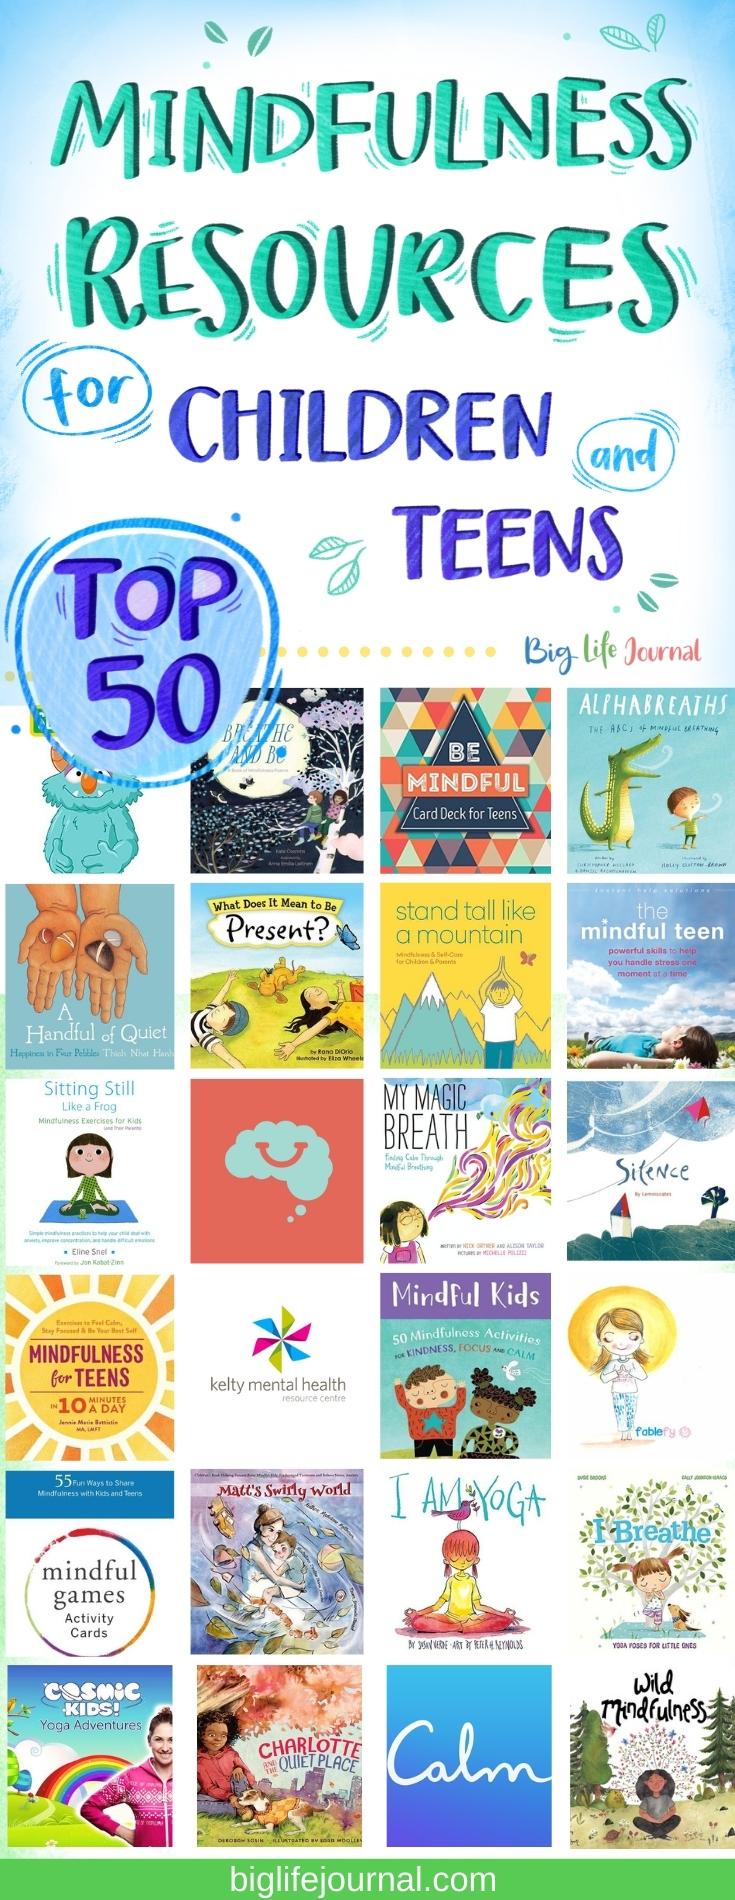 10 Ways to Practice Mindfulness Poster + Make Your Own Mindfulness Collage